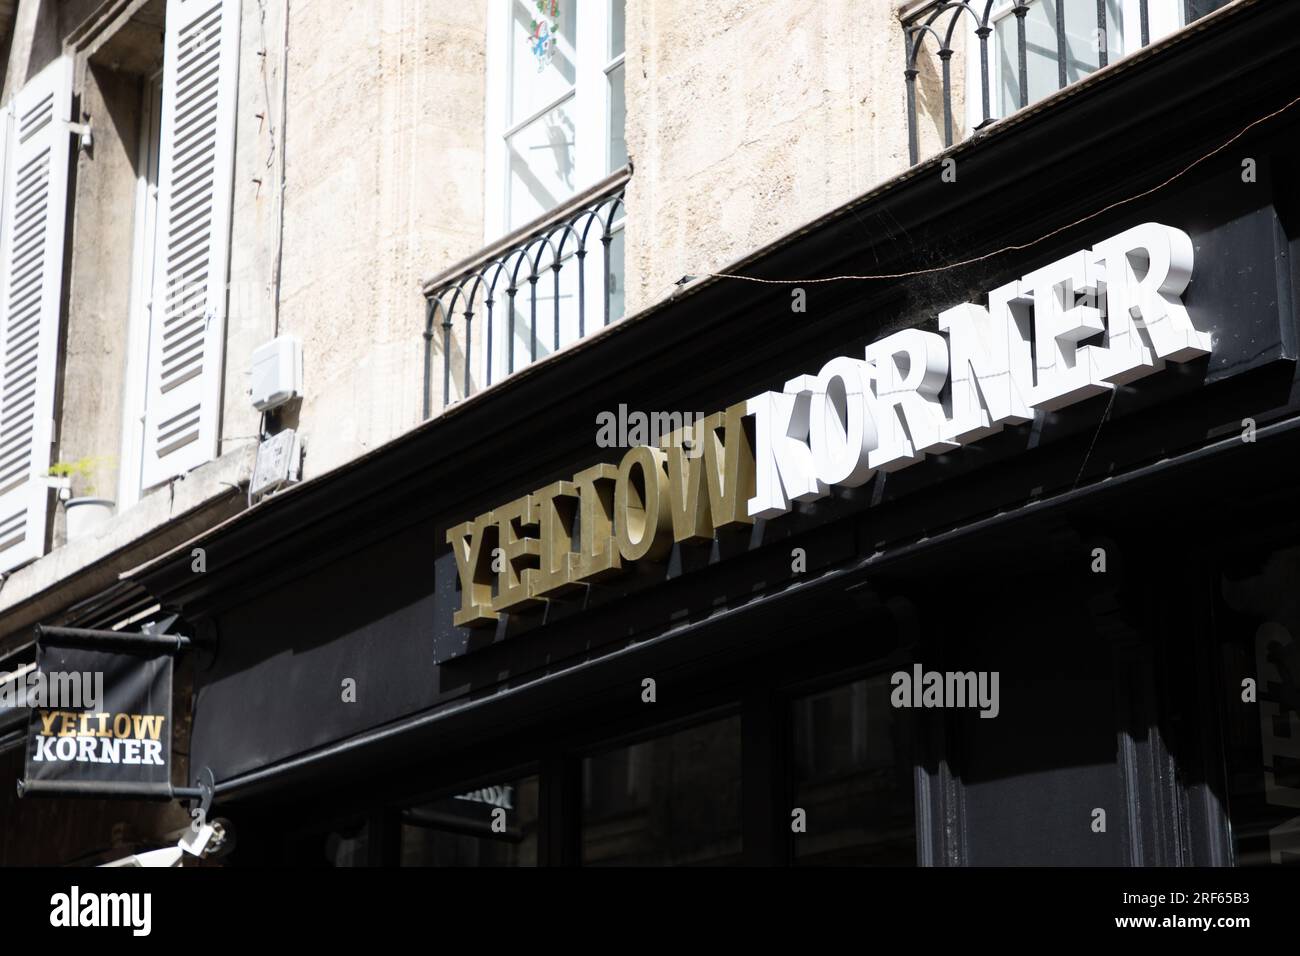 Bordeaux , France - 07 25 2023 : Yellow Korner logo sign and brand text ...